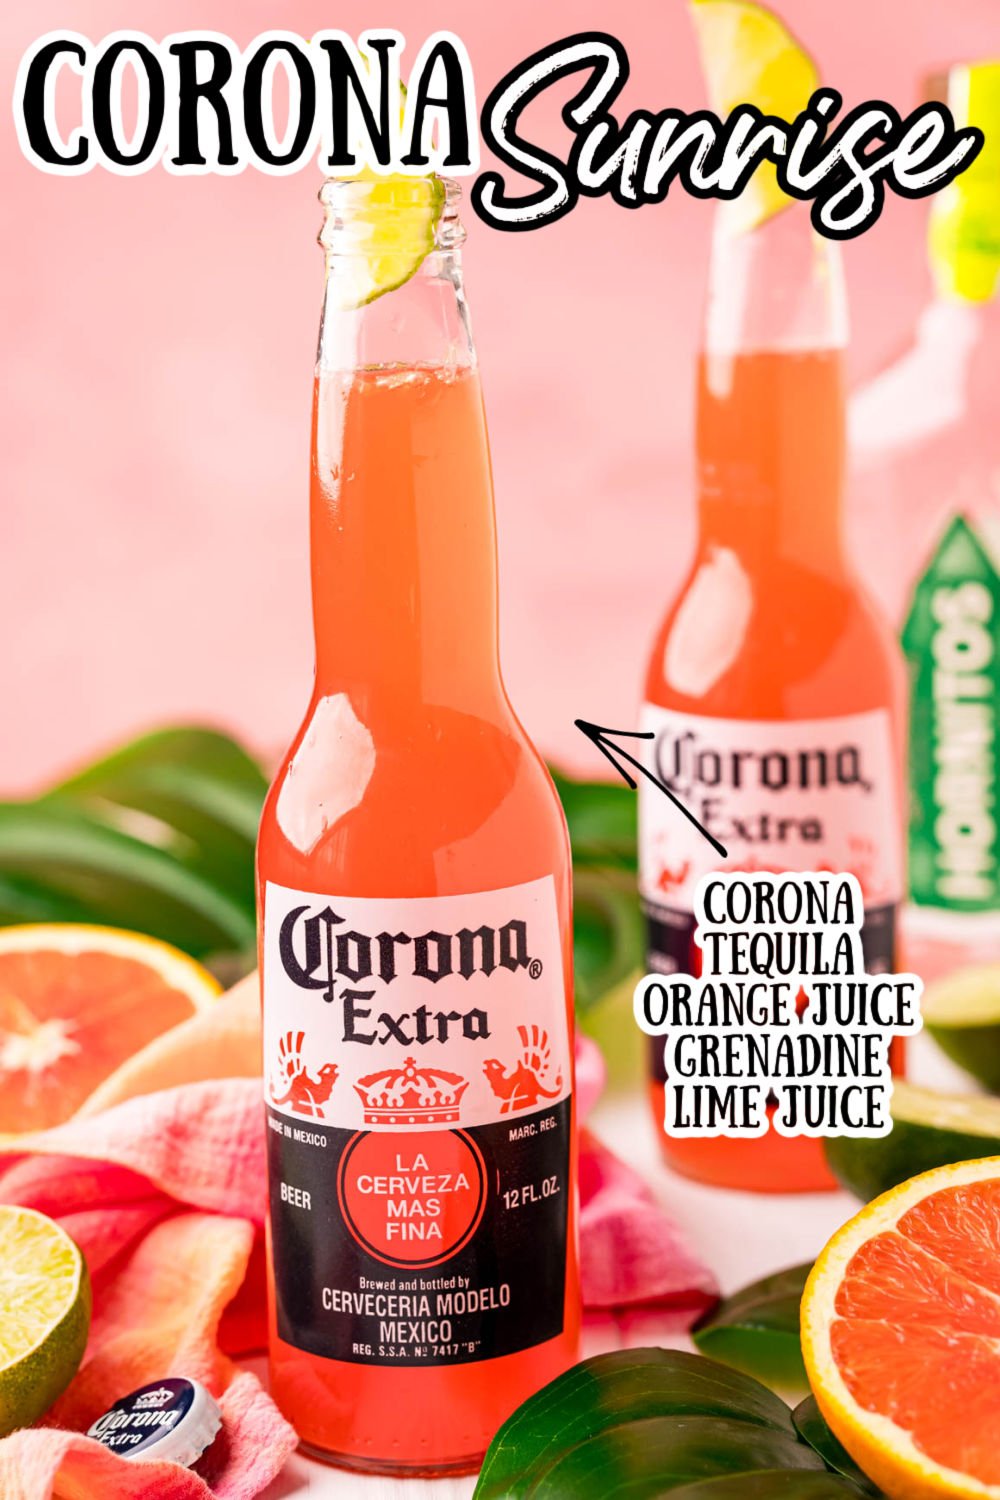 This Corona Sunrise Cocktail is a fun and easy drink recipe made right in the bottle with beer, tequila, orange juice, grenadine, and lime juice and is perfect for summer! via @sugarandsoulco